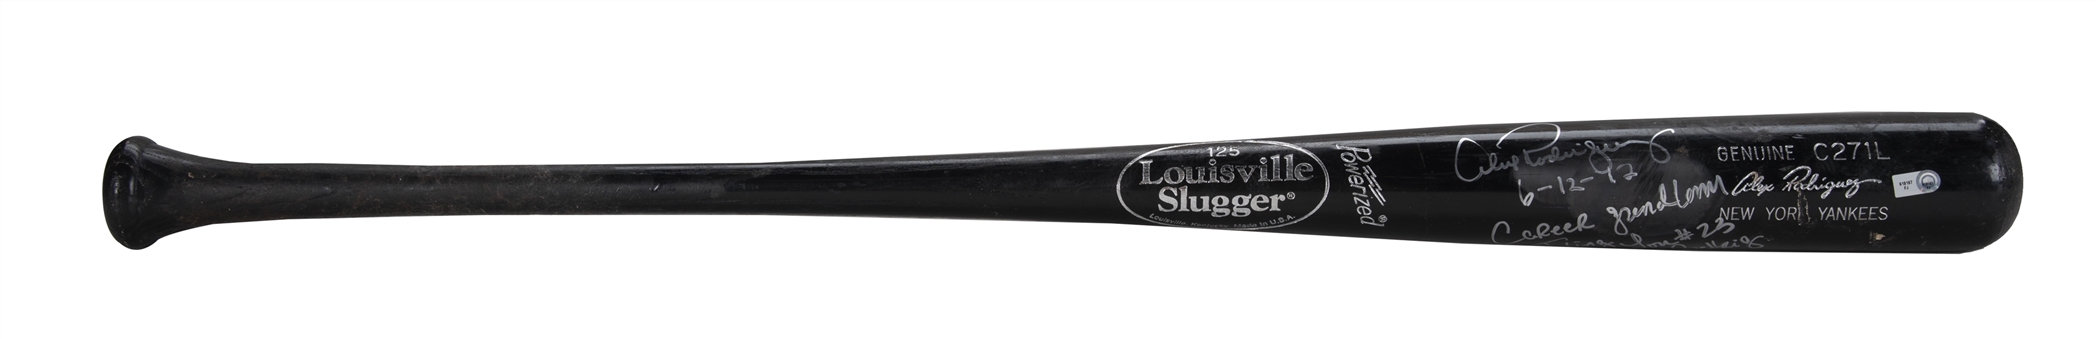 2012 Alex Rodriguez Game Used & Signed Louisville Slugger C271L Model Bat Used To Tie Lou Gehrig For Career Grand Slam #23 (Rodriguez LOA & MLB Authenticated)